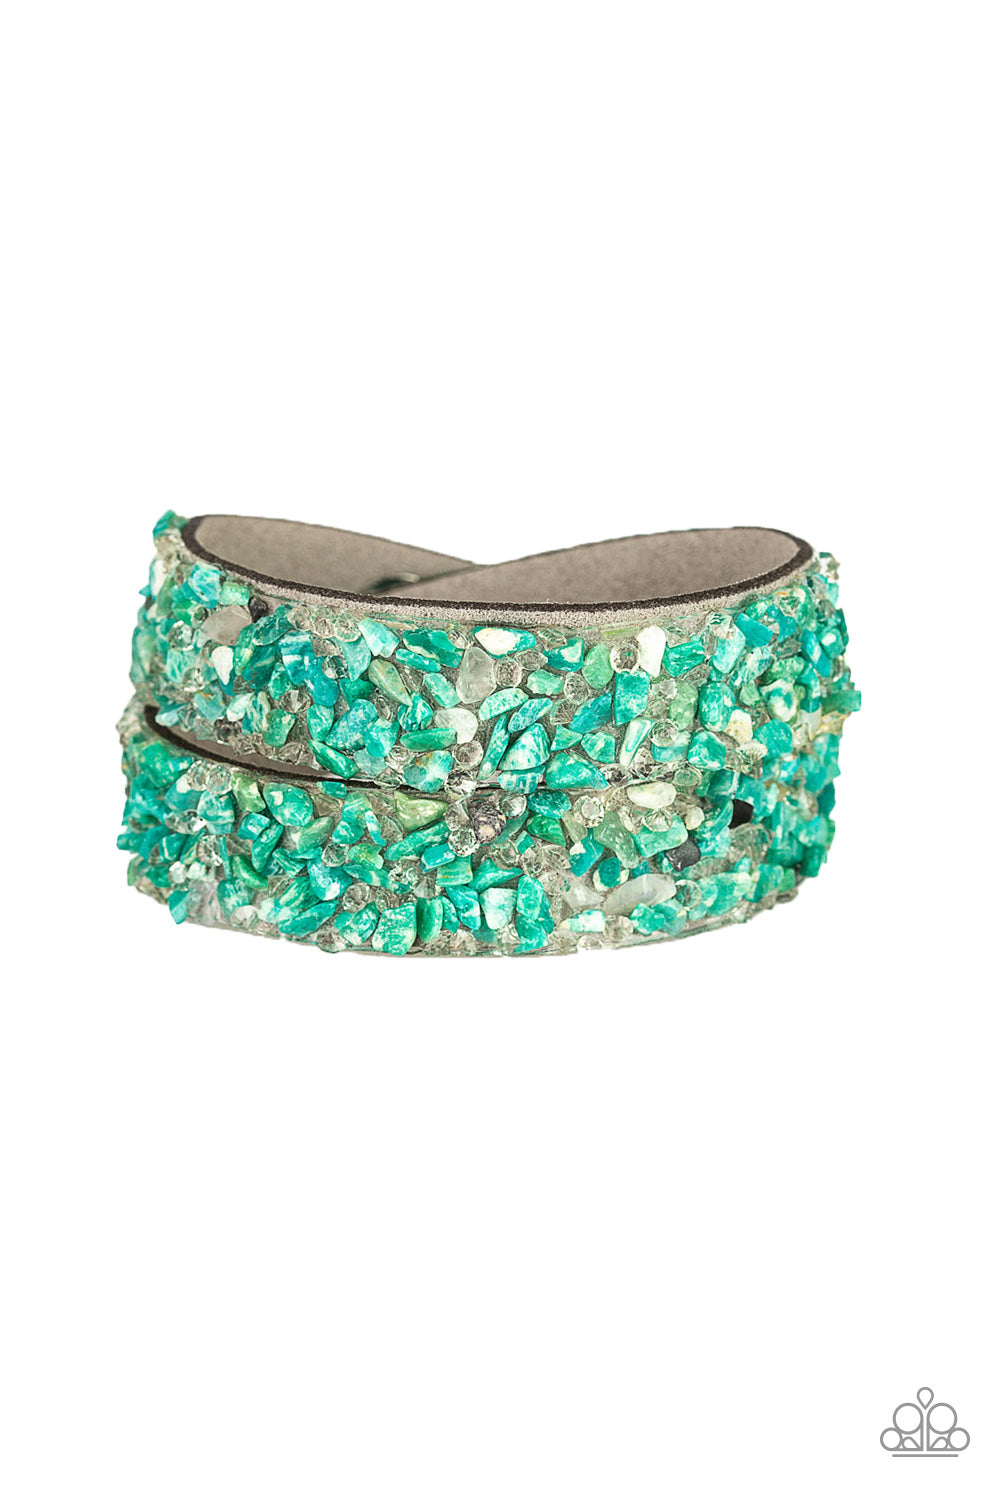 five-dollar-jewelry-crush-to-conclusions-green-bracelet-paparazzi-accessories